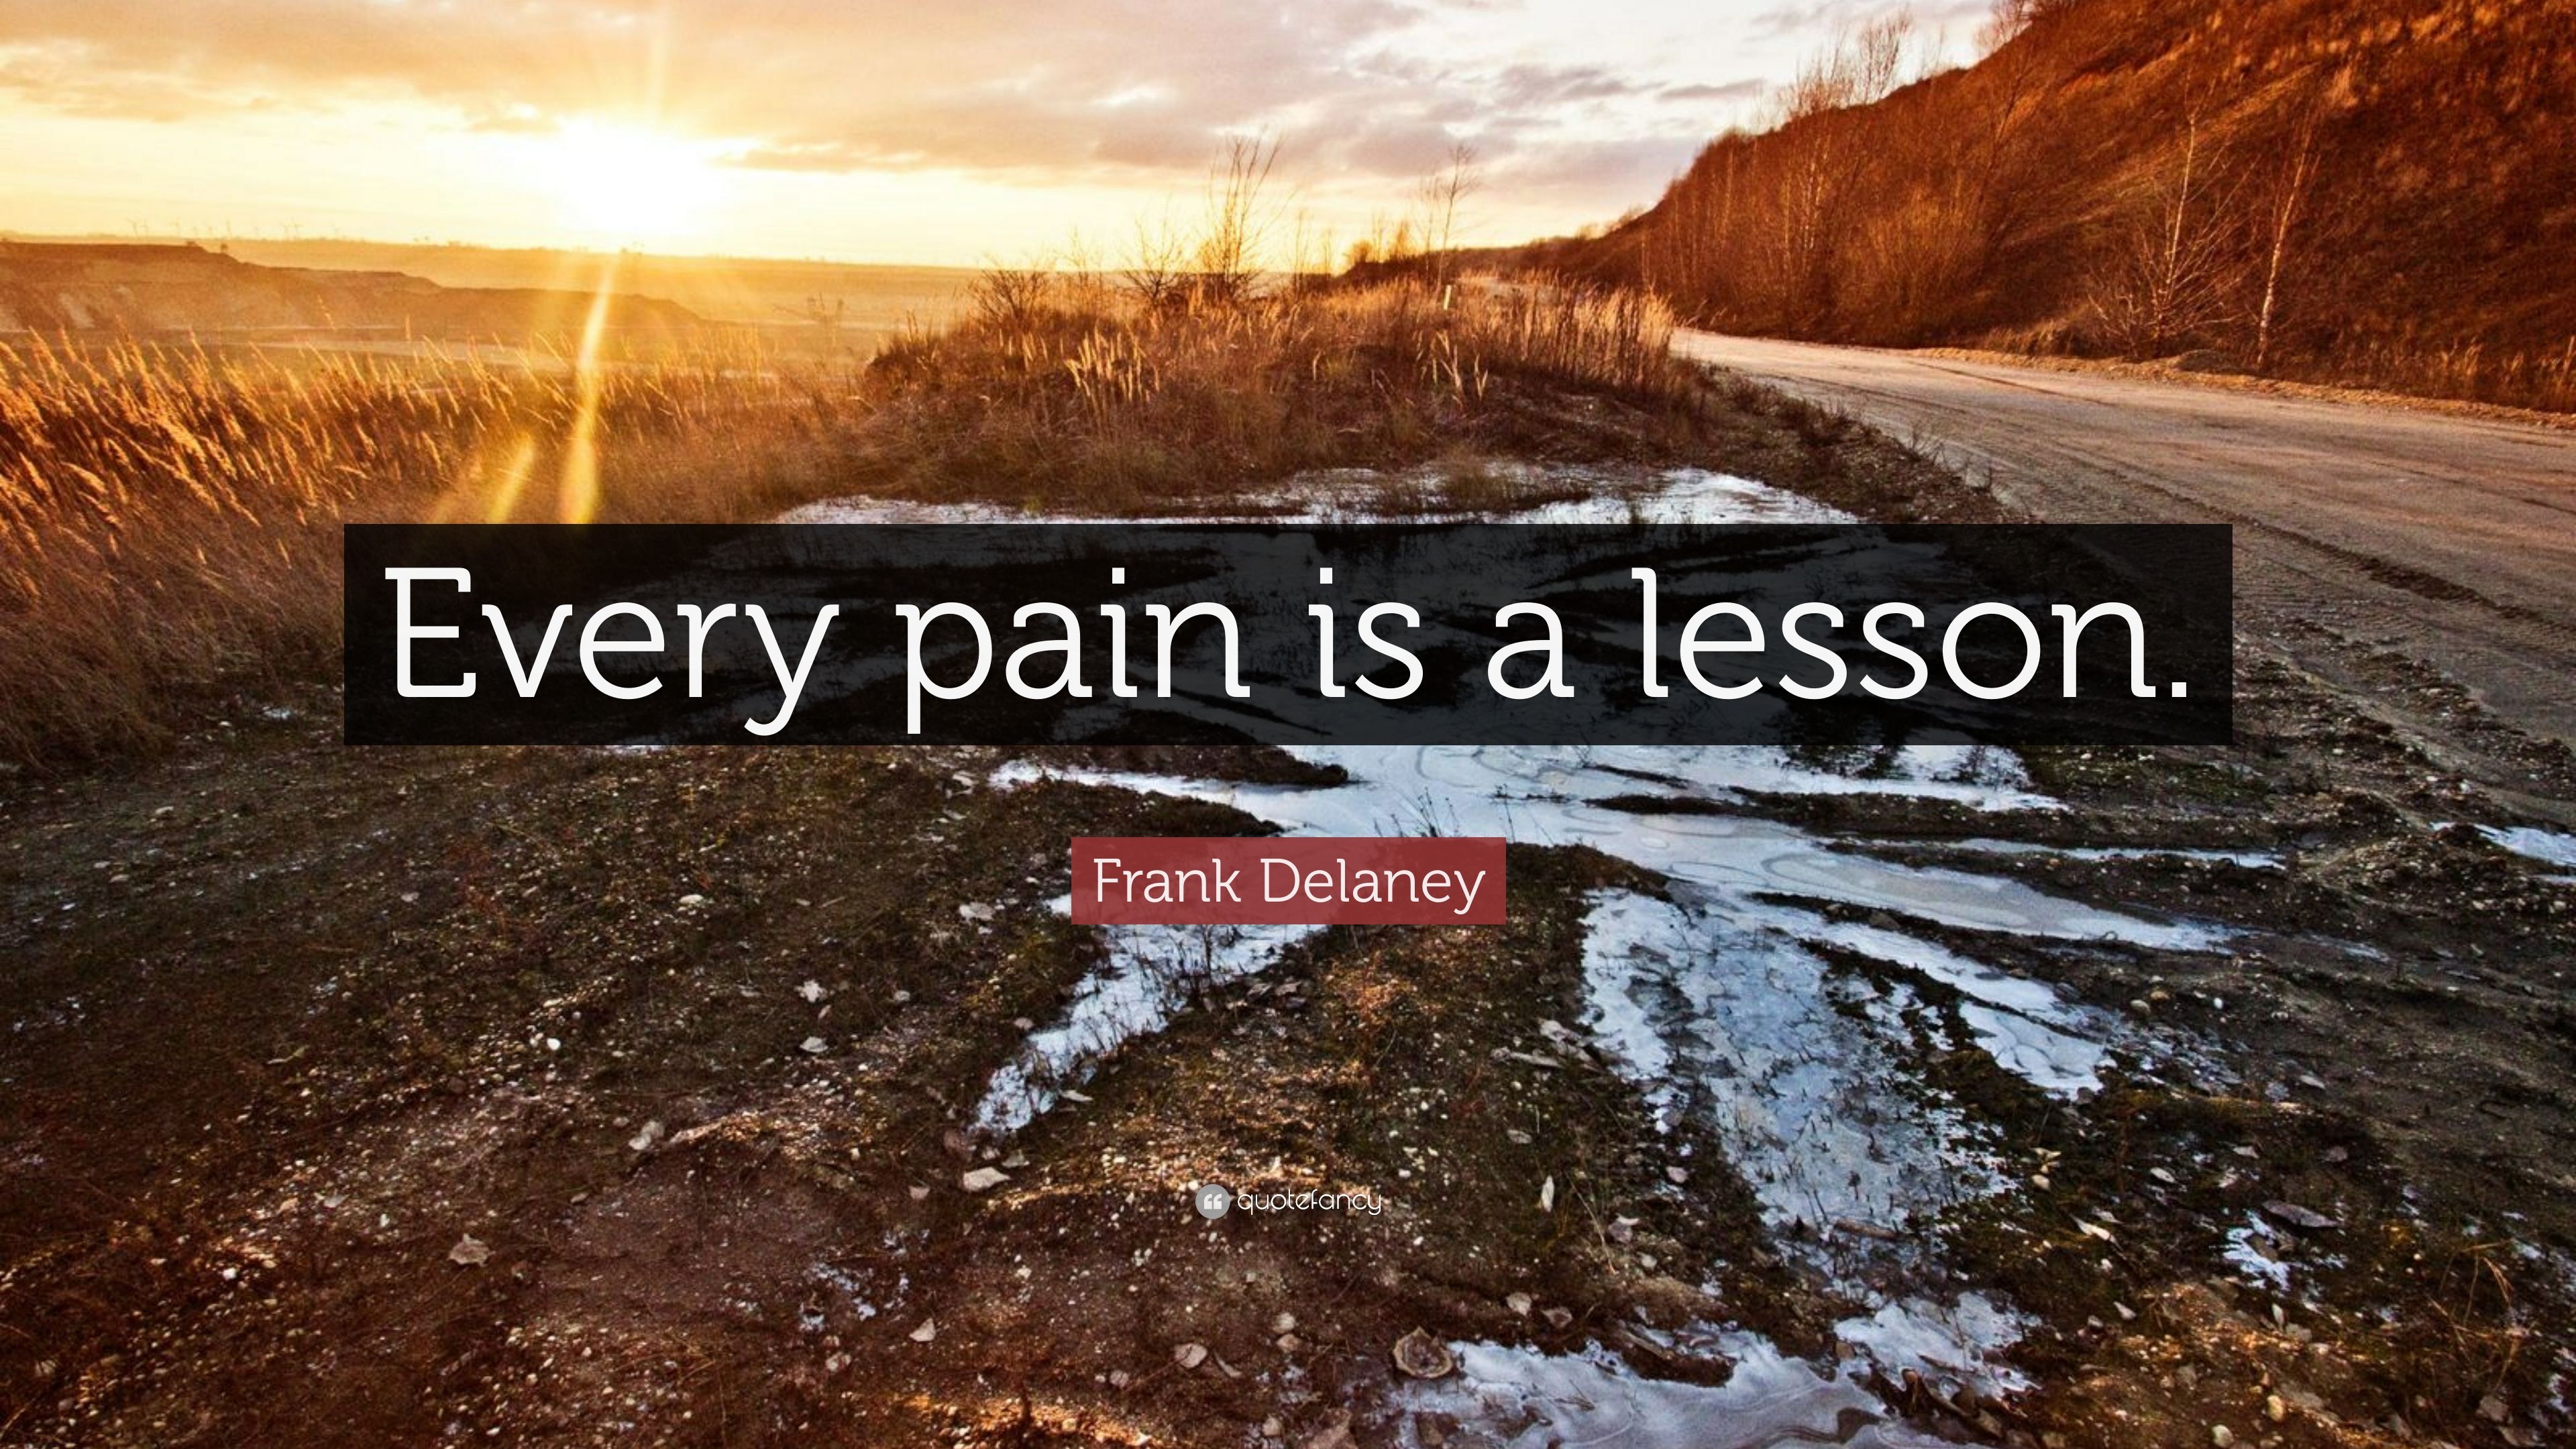 Frank Delaney Quote: “Every pain is a lesson.” 7 wallpaper